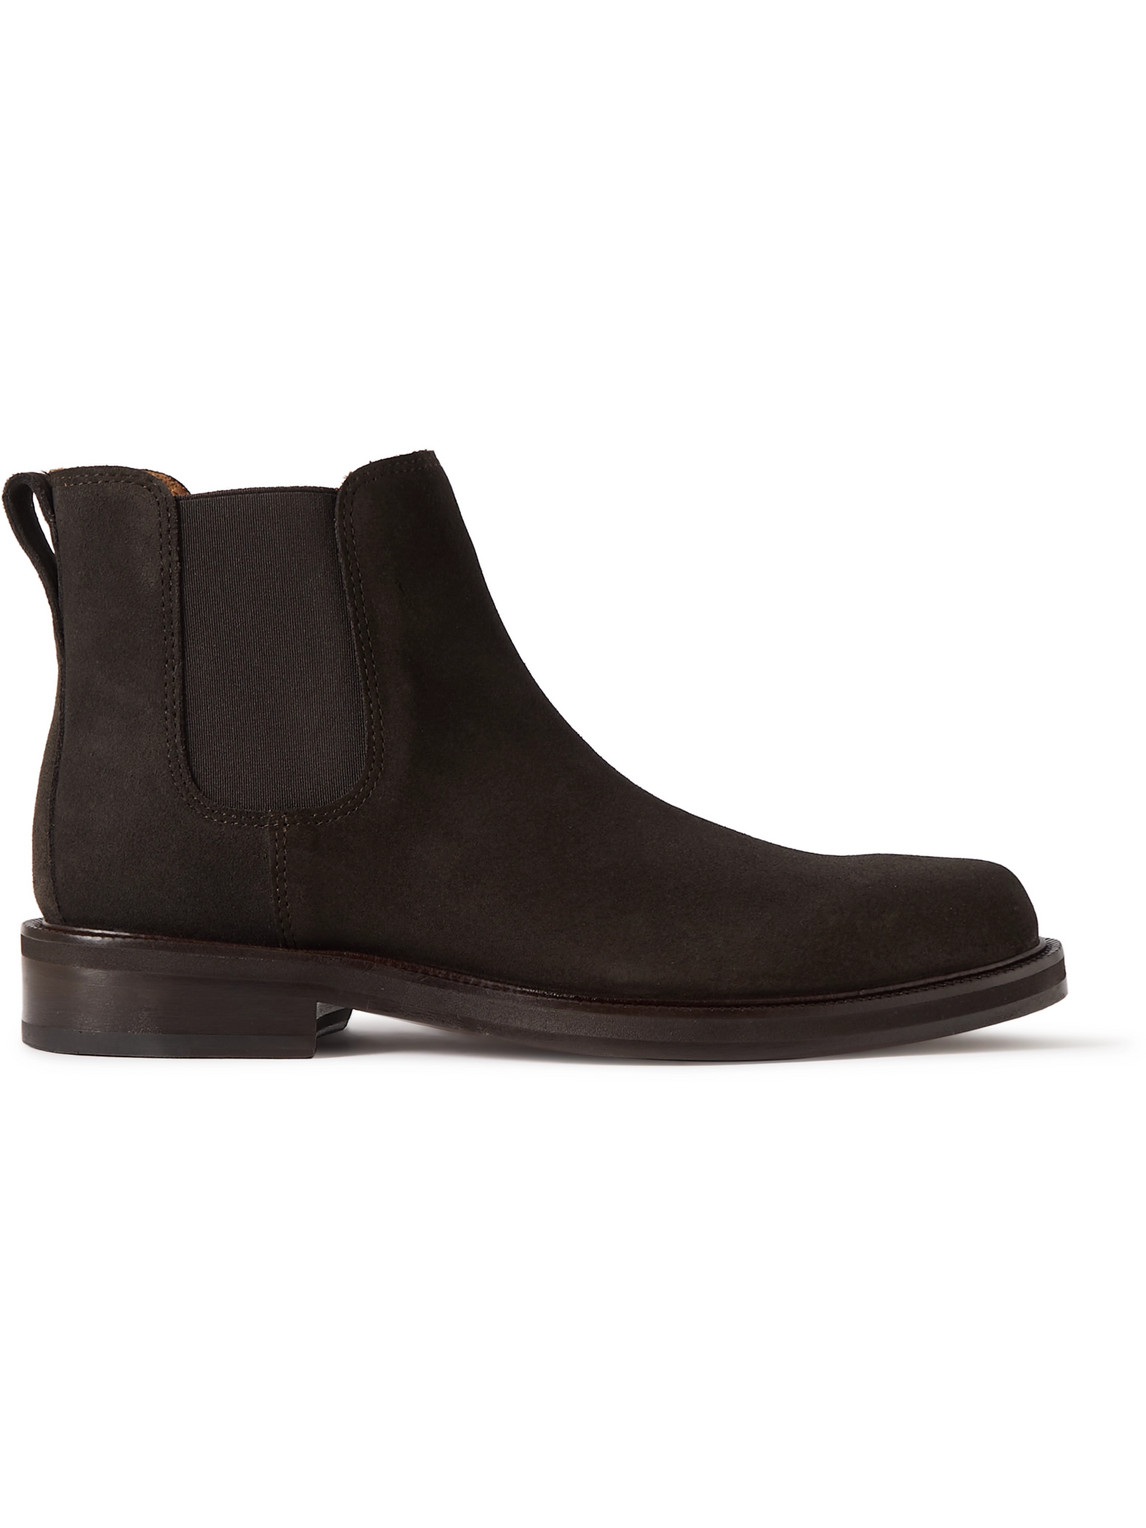 Mr P Olie Suede Chelsea Boots In Brown